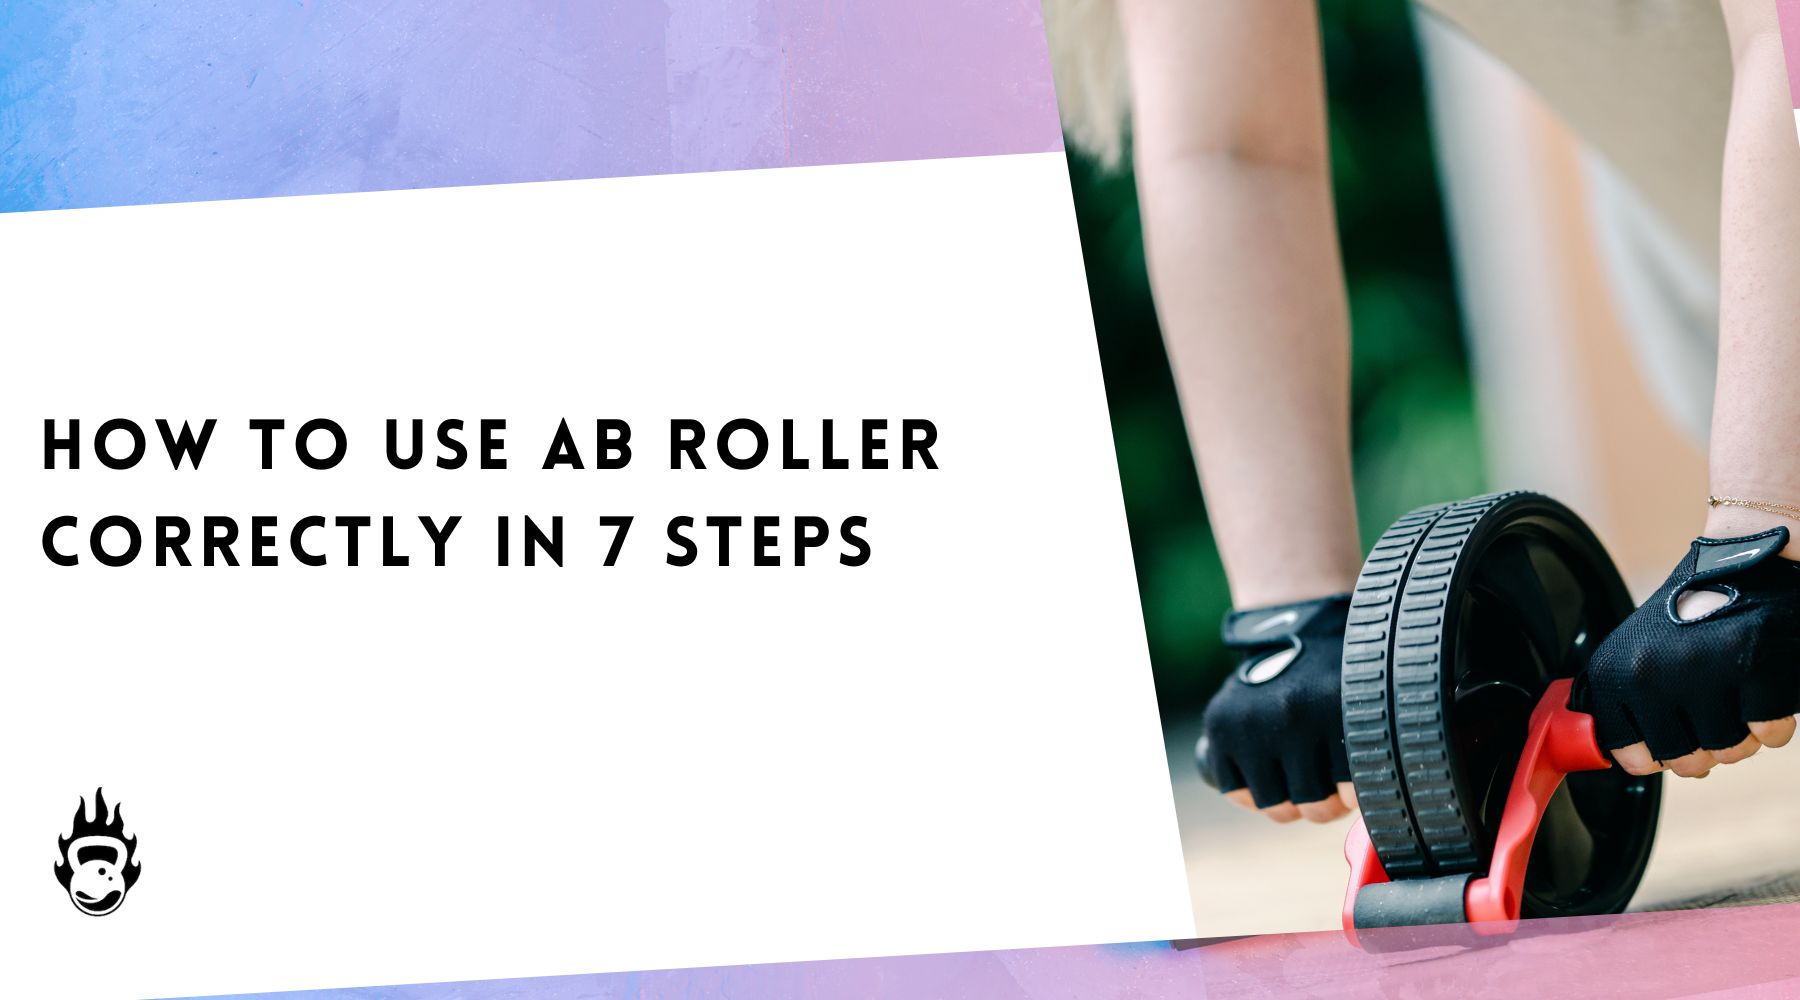 Master Ab Rollers In 7 Steps: How To Use It Correctly –